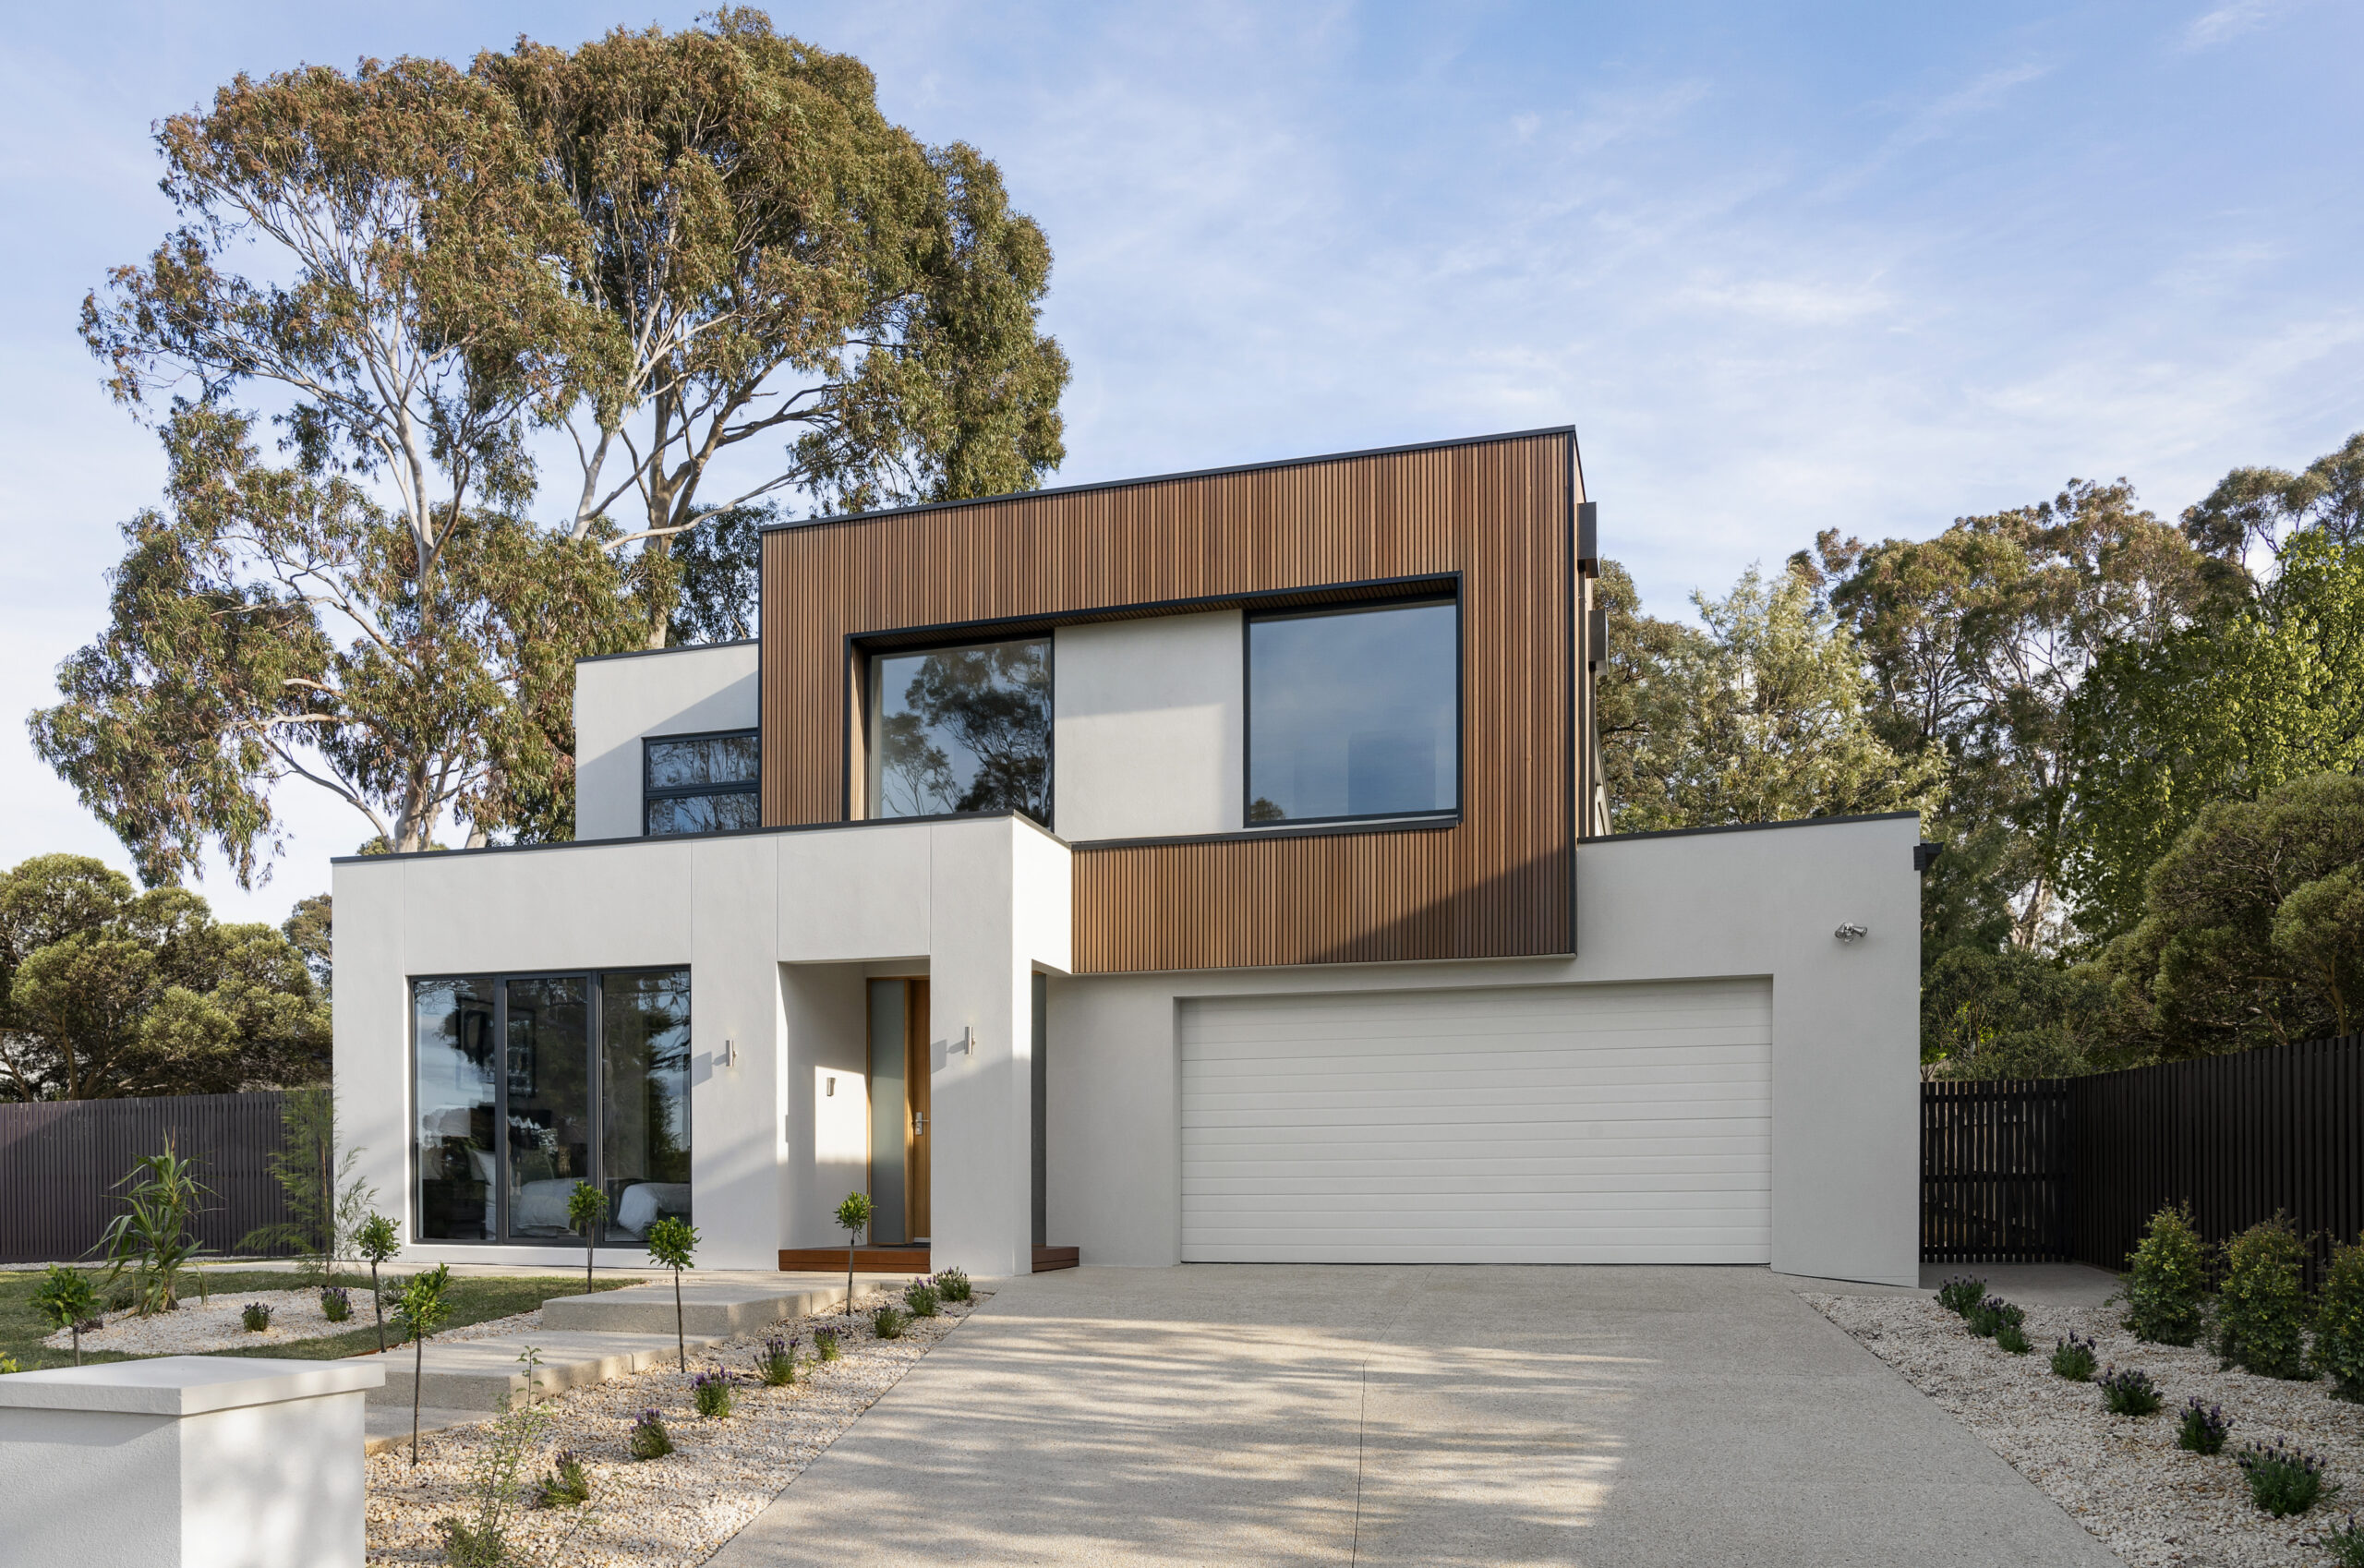 The façade of a pale double-storey Hebel home with light timber cladding.